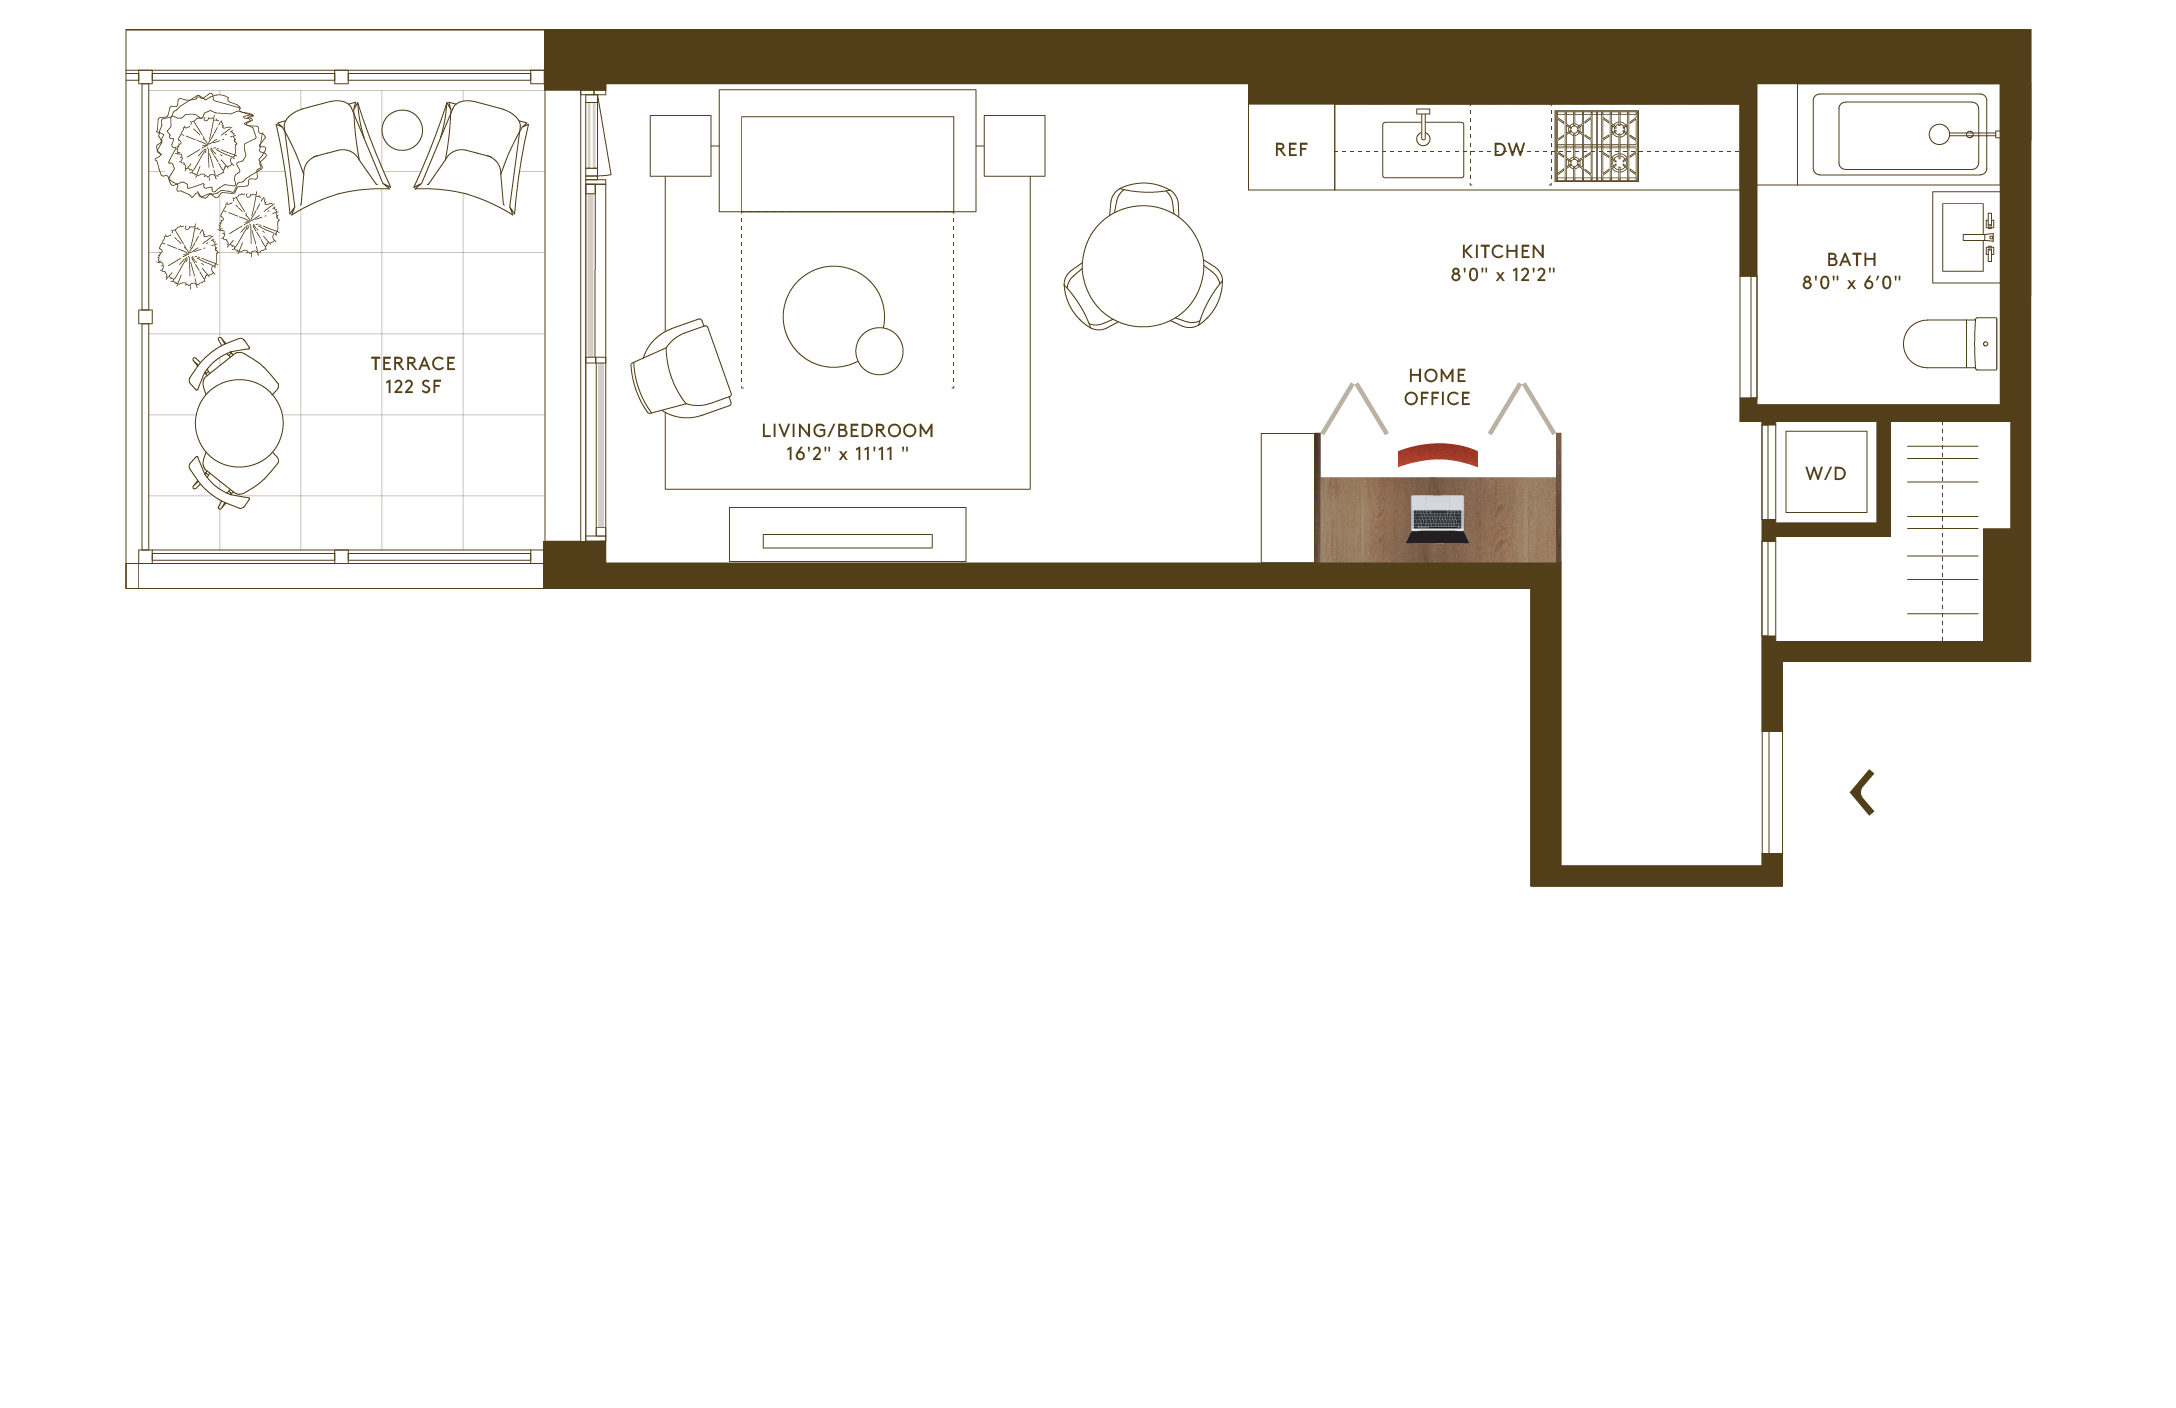 Studio floorplan with terrace and home office at Hendrix House condos in Kips Bay NYC.